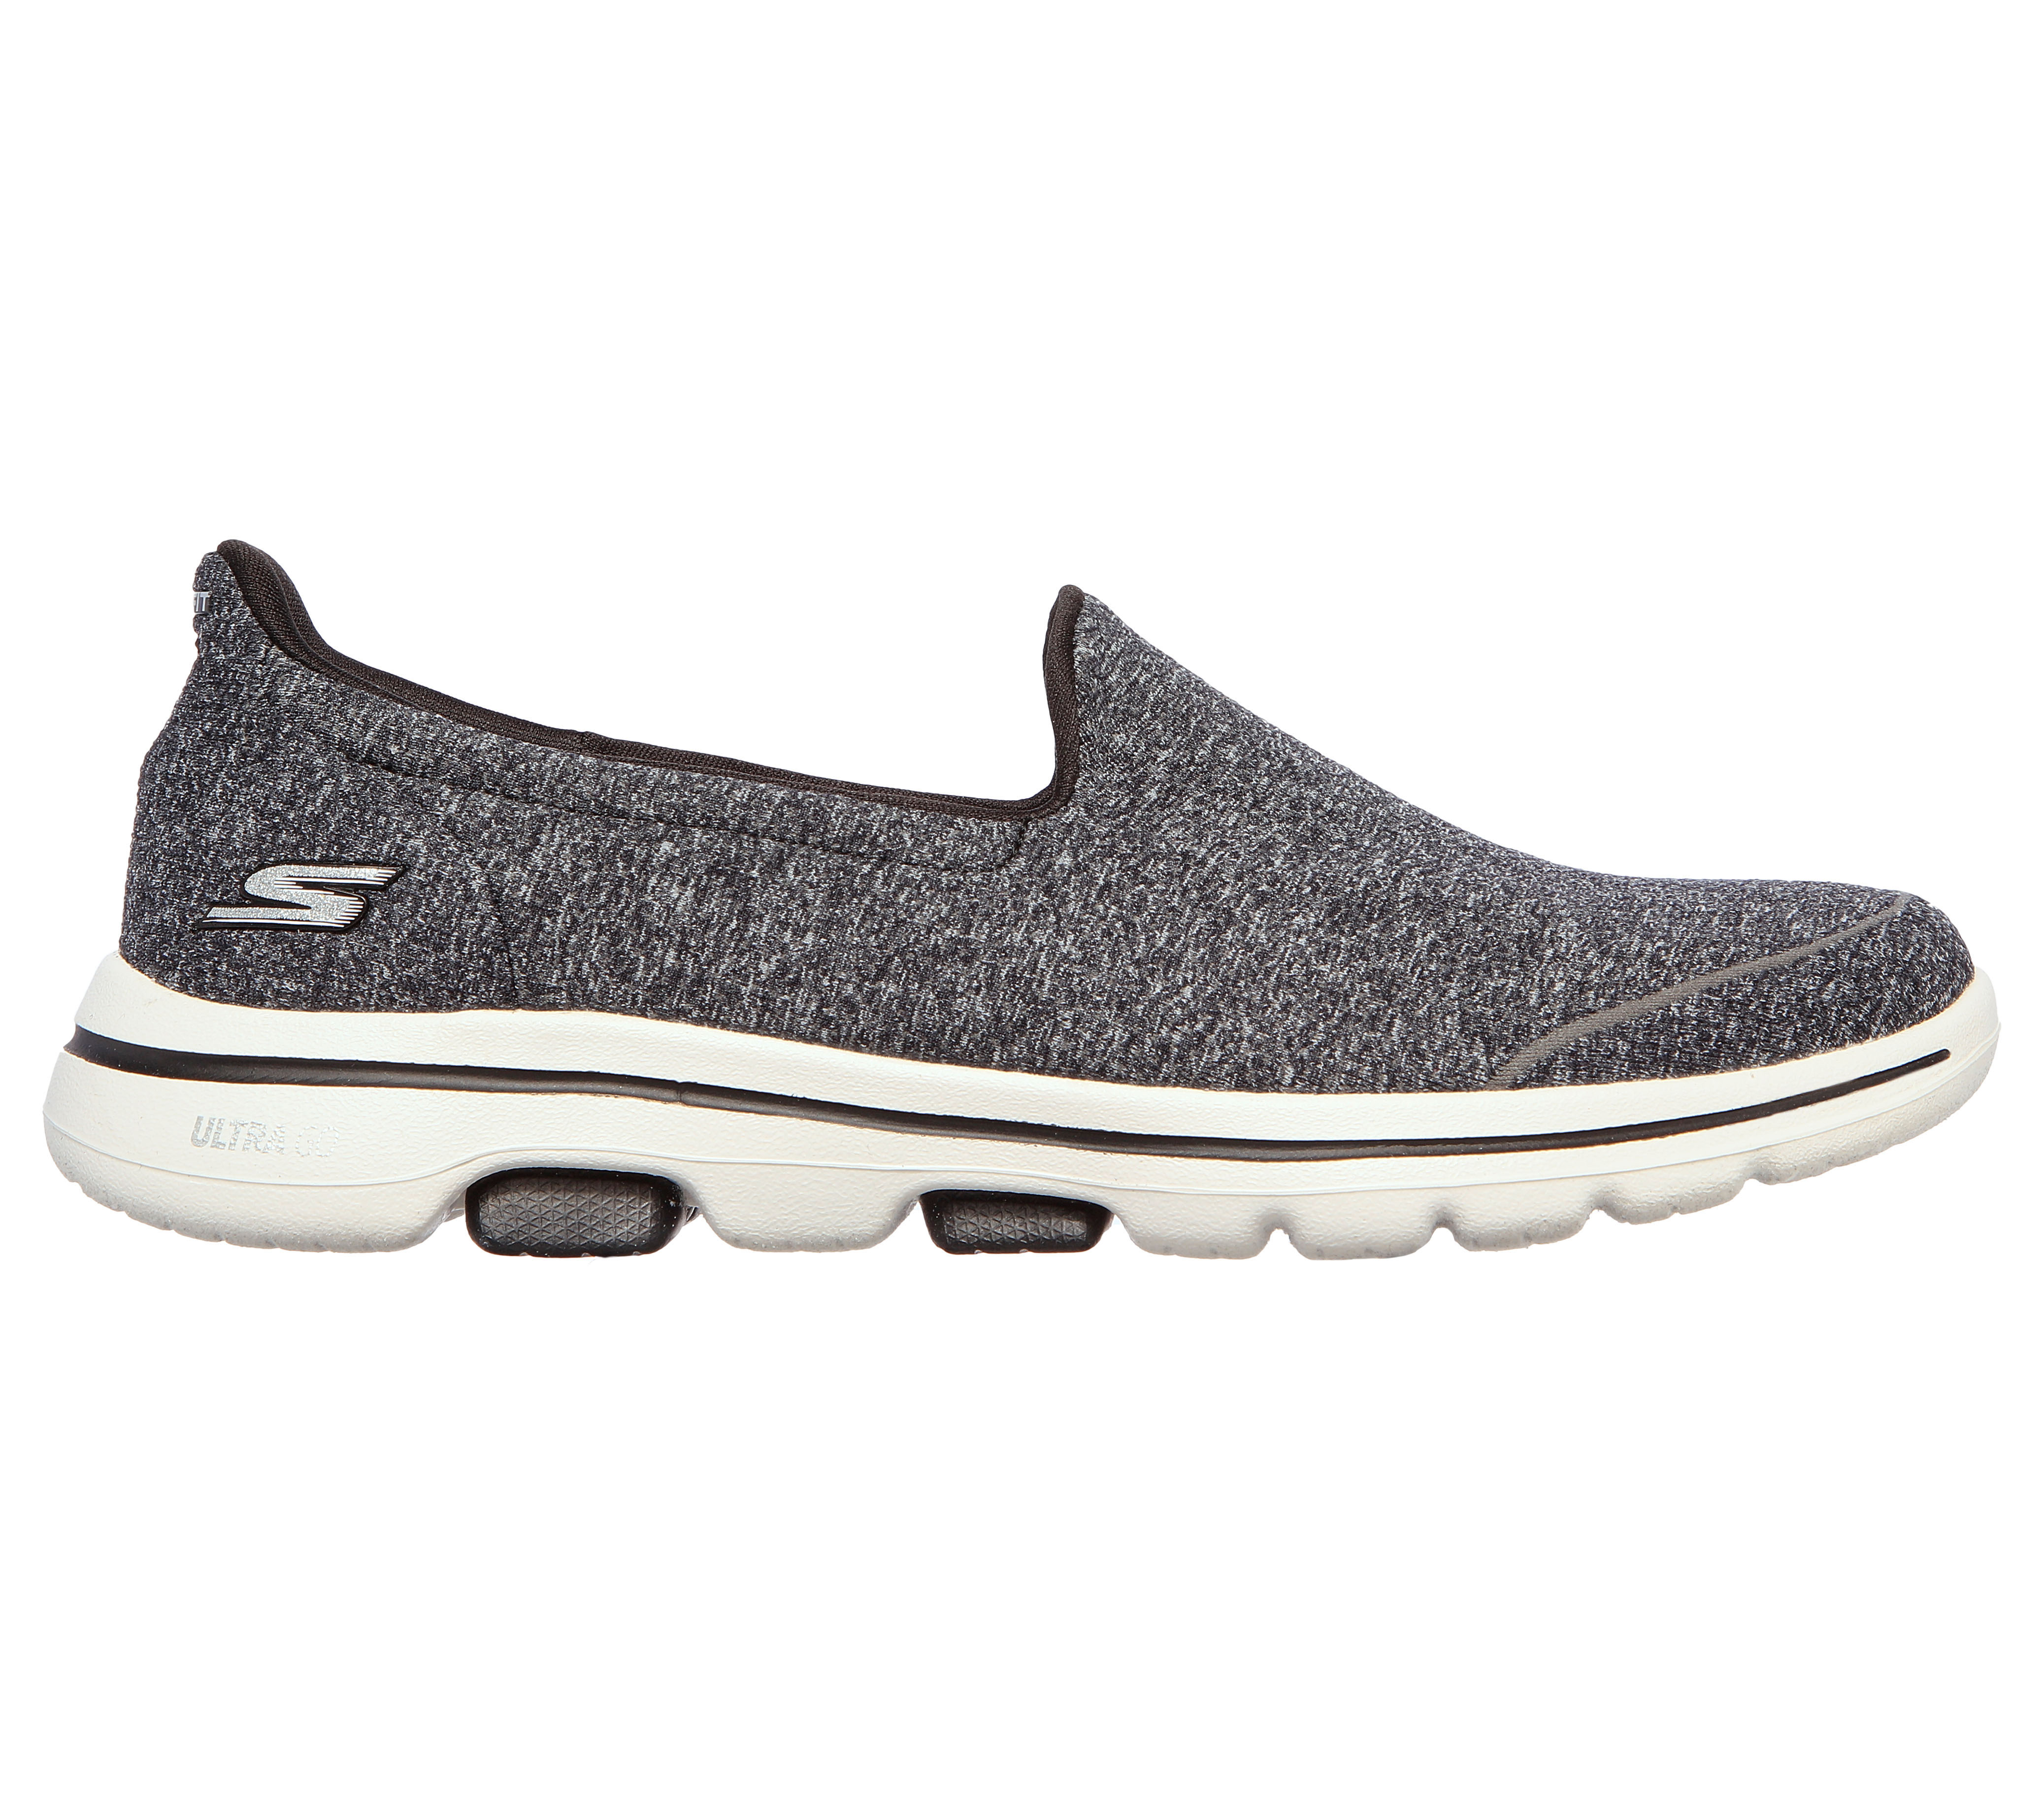 SKECHERS - SKECHERS GOWALK 5 – TRENDY The leaders in walking shoe  technology continue to innovate with the Skechers GOwalk 5™ - Trendy.  Features lightweight, responsive ULTRA GO™ cushioning and high-rebound  COMFORT